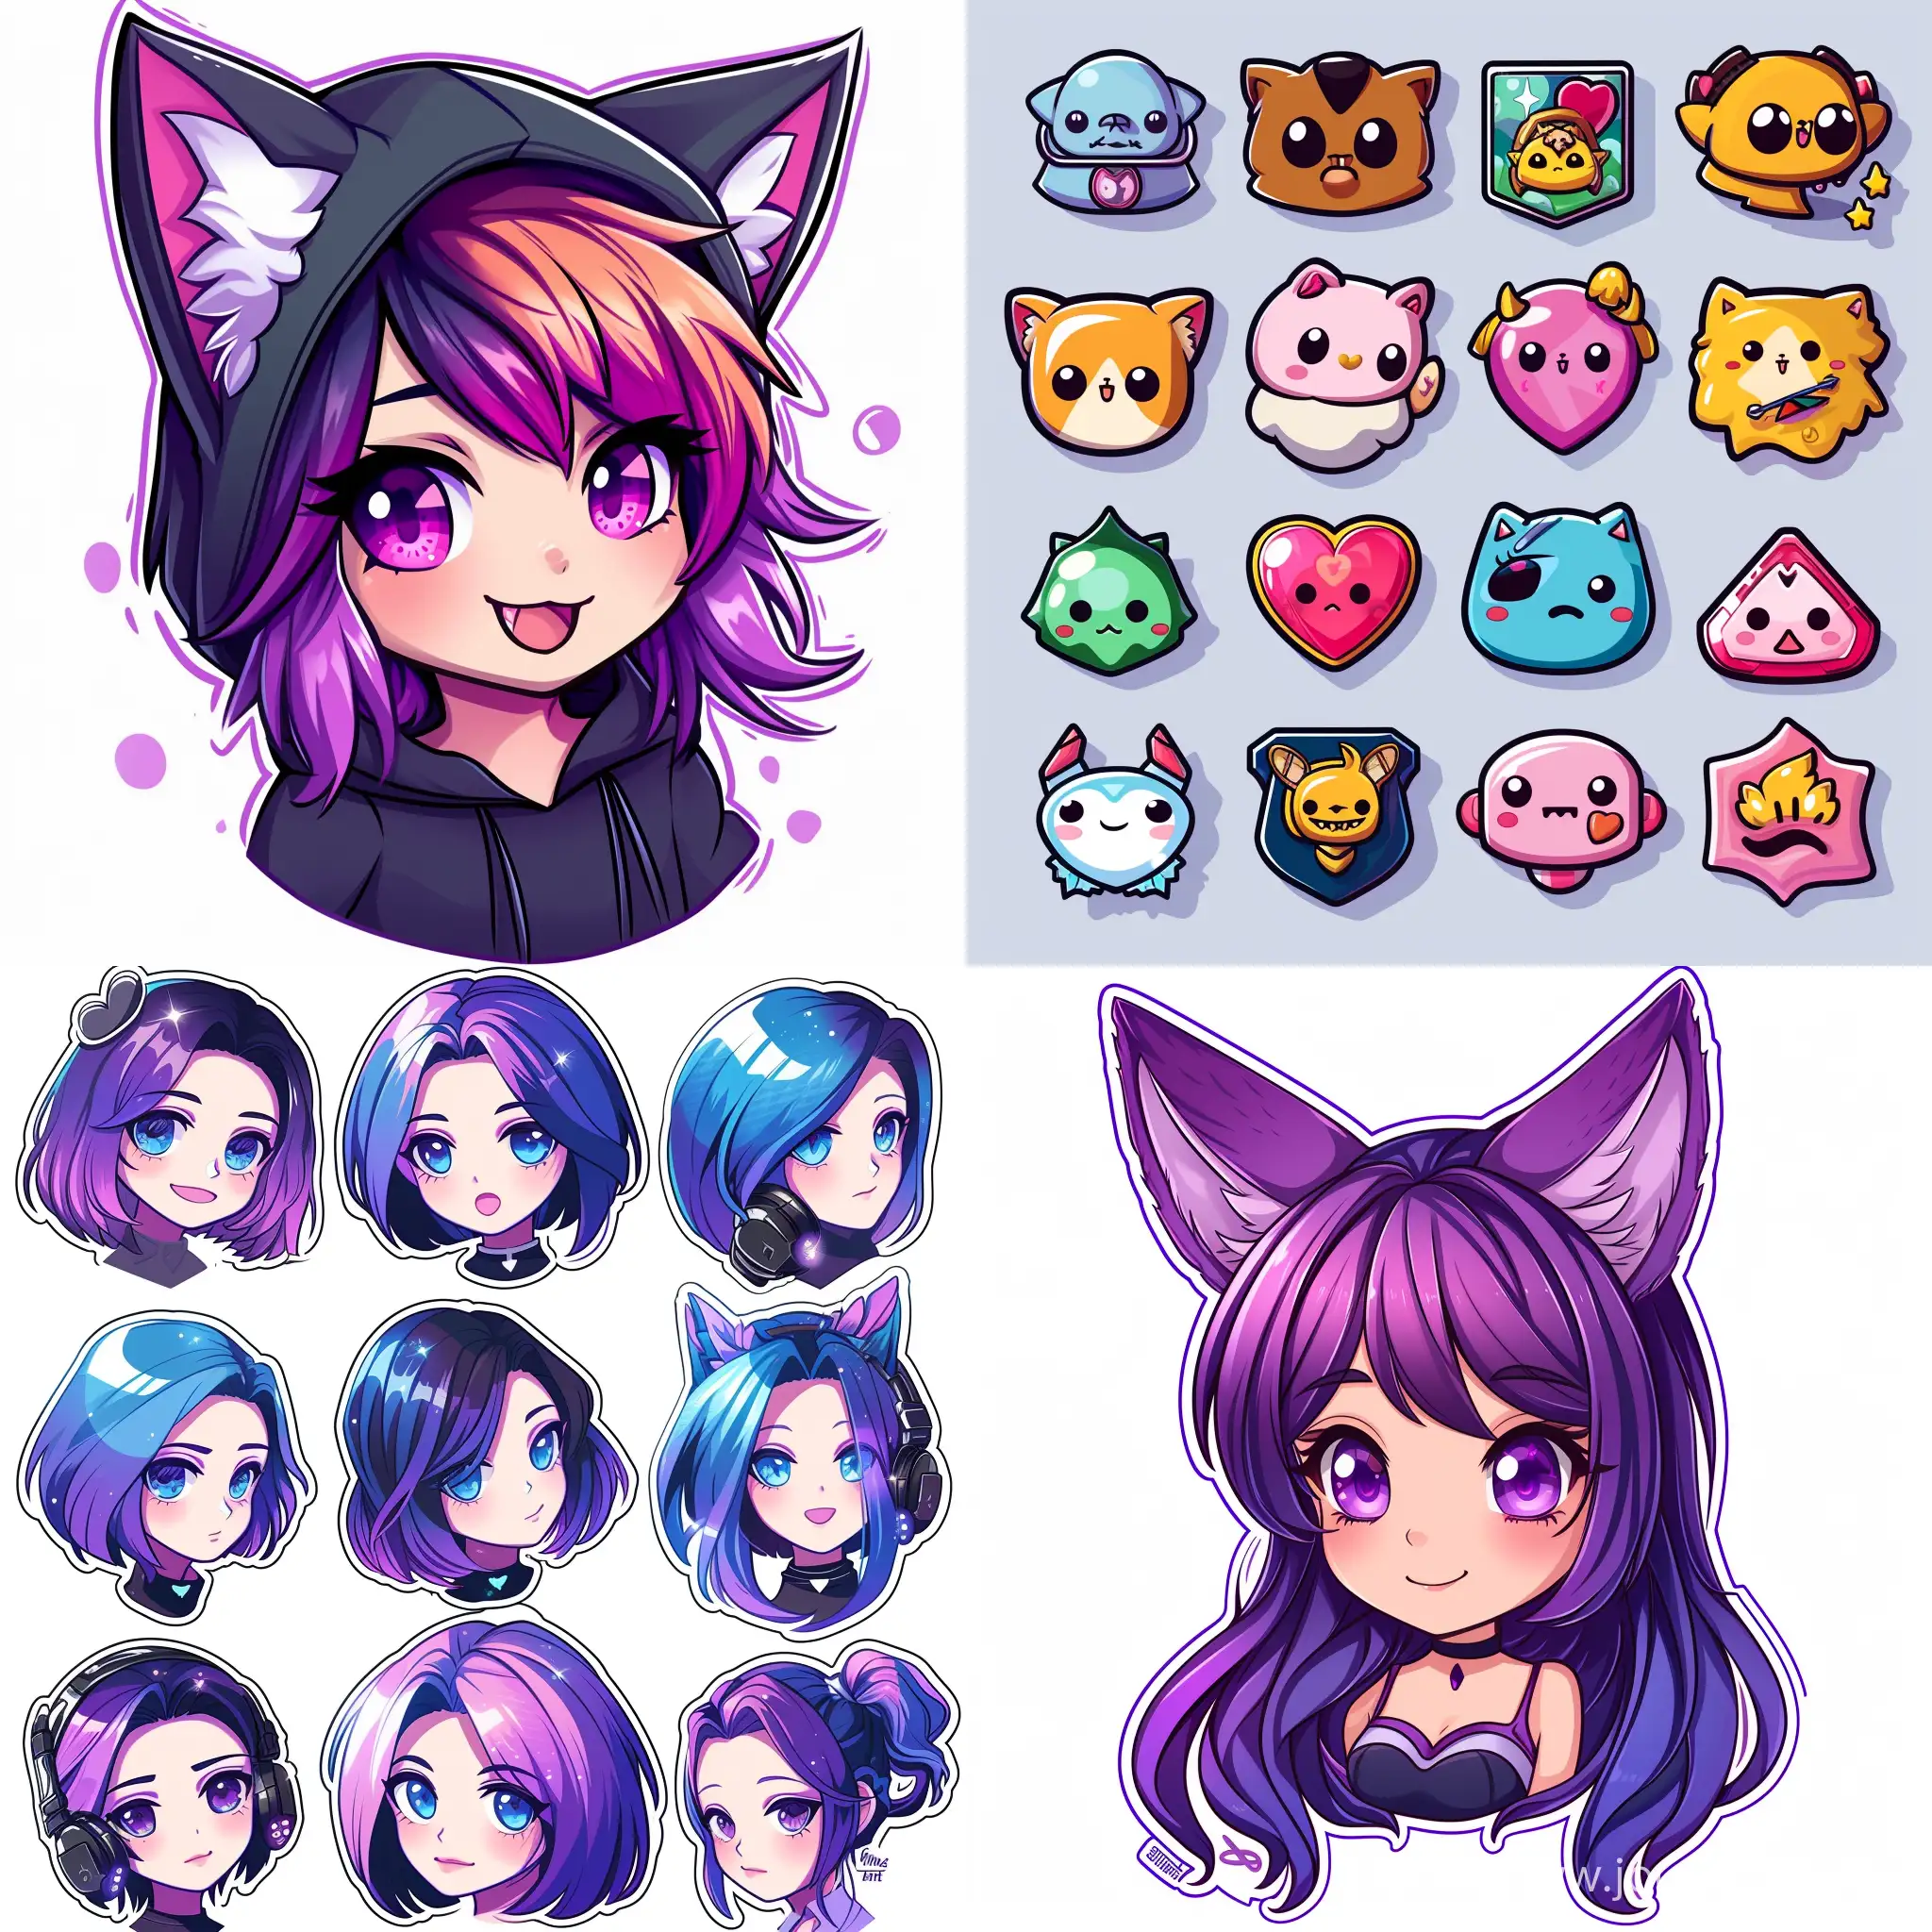 Adorable-Anime-Chibi-Twitch-Emotes-and-Badges-Design